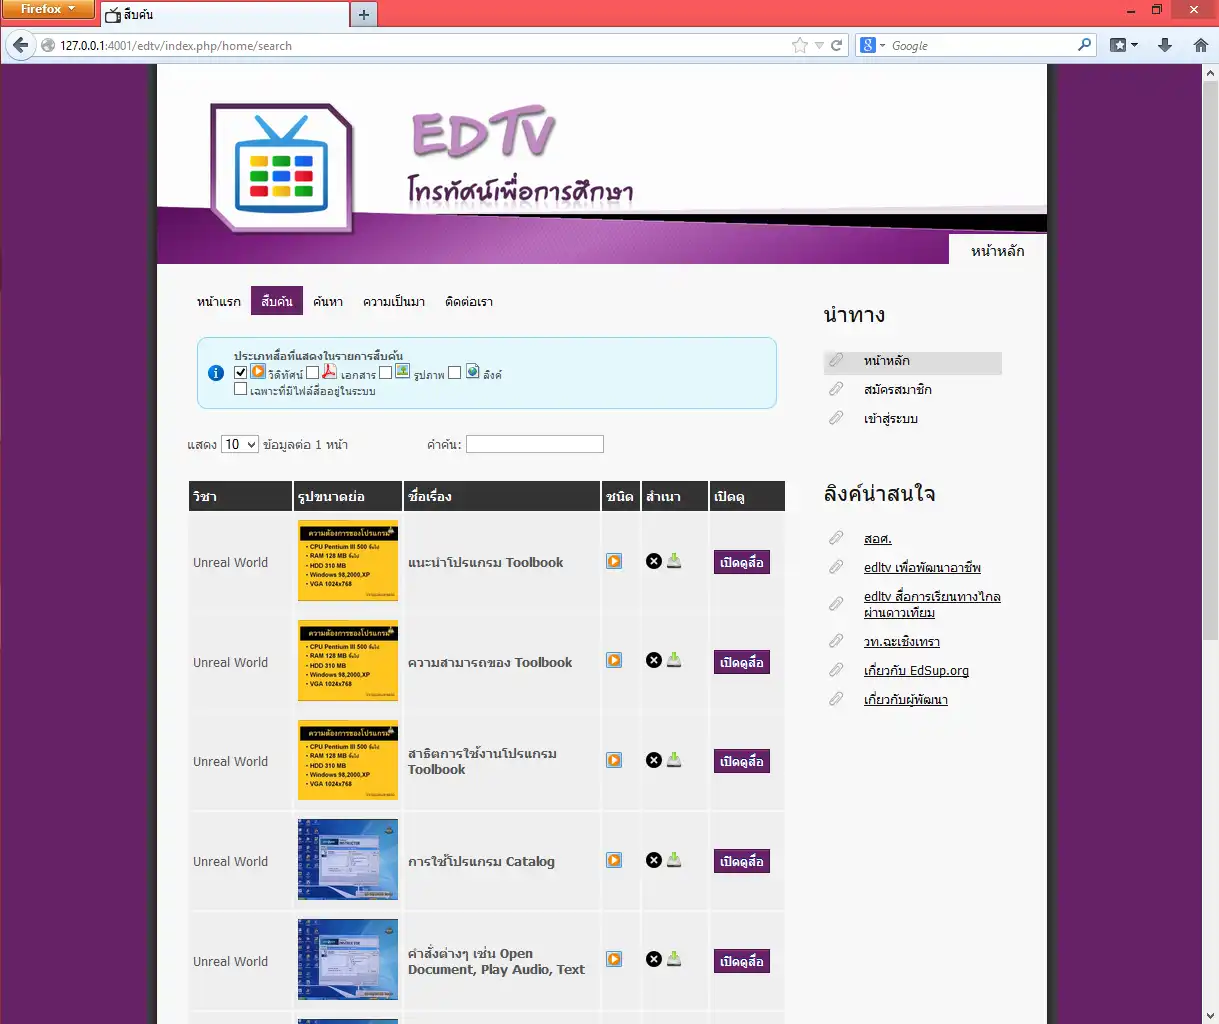 Download web tool or web app edtv